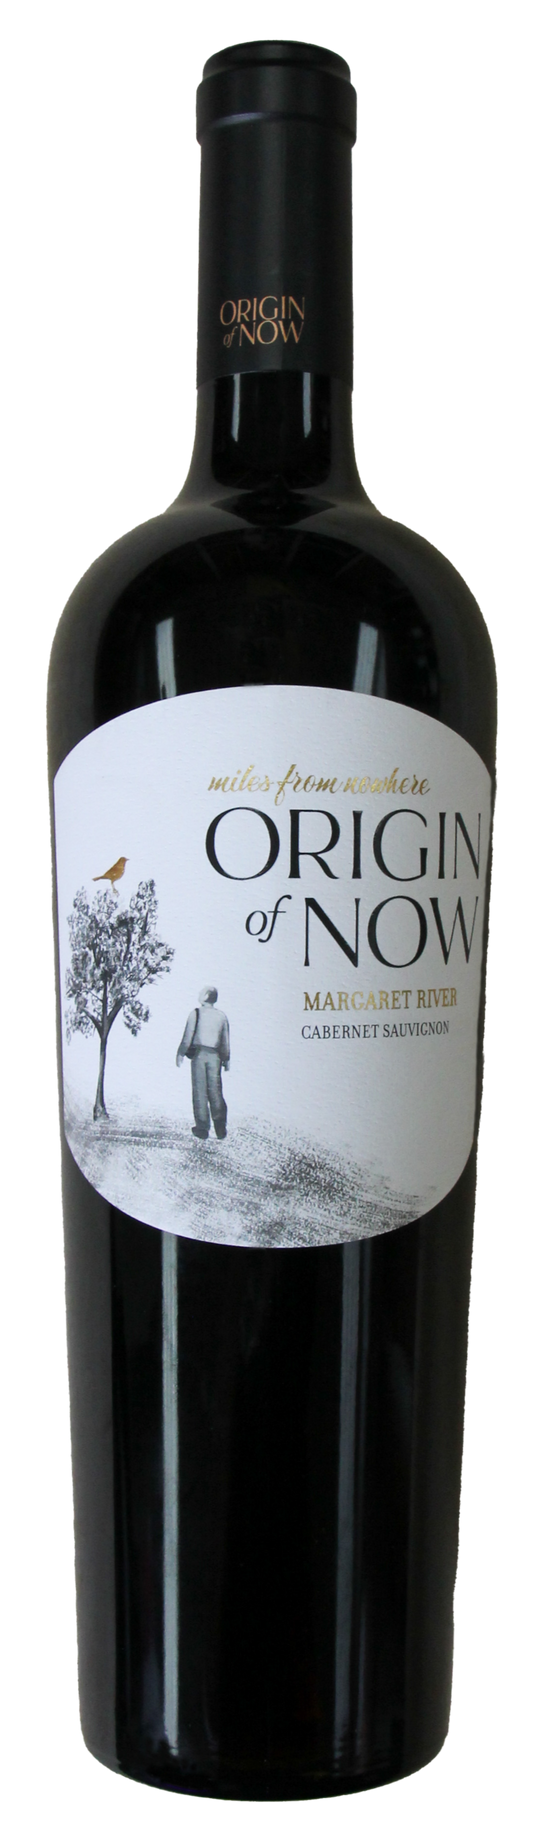 Origin of Now by Miles from Nowhere Margaret River Cabernet Sauvignon 2021